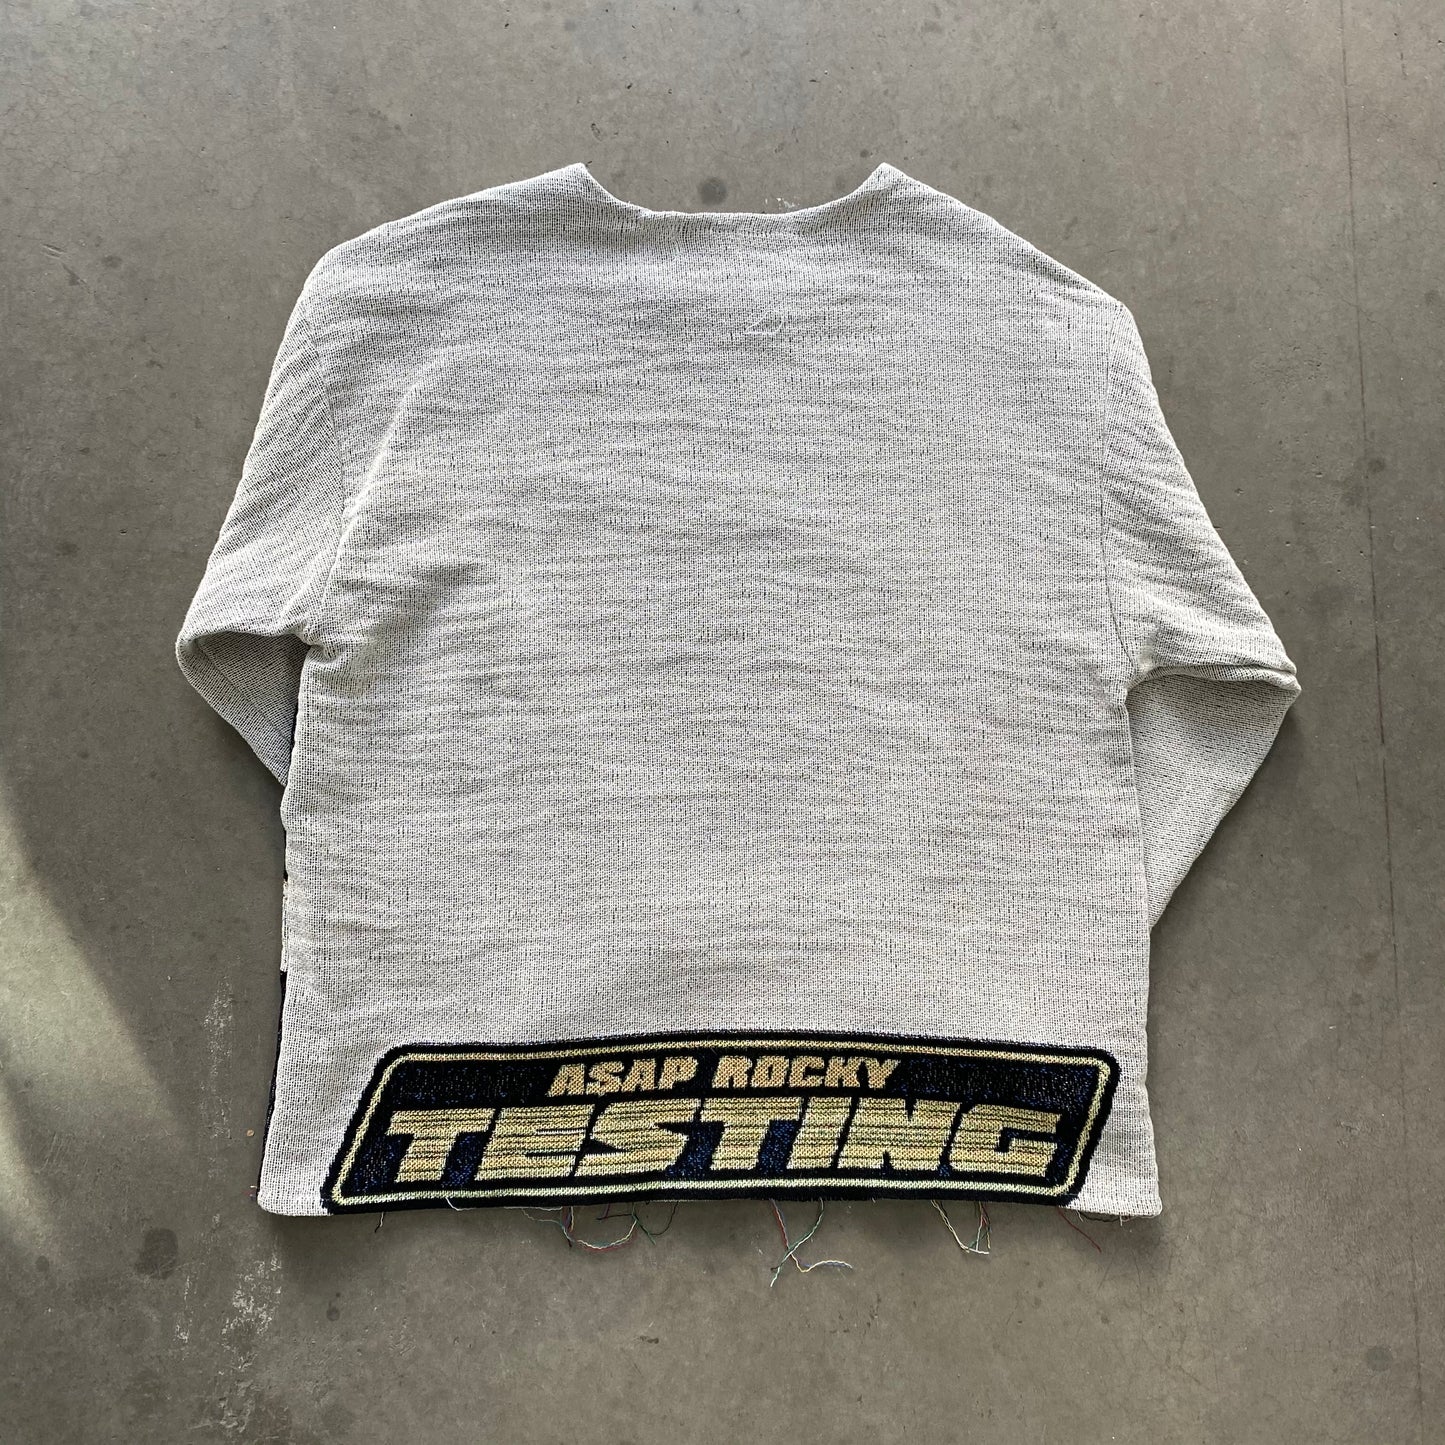 4x1111 A$AP Rocky "Testing Tapesrty" Sweater